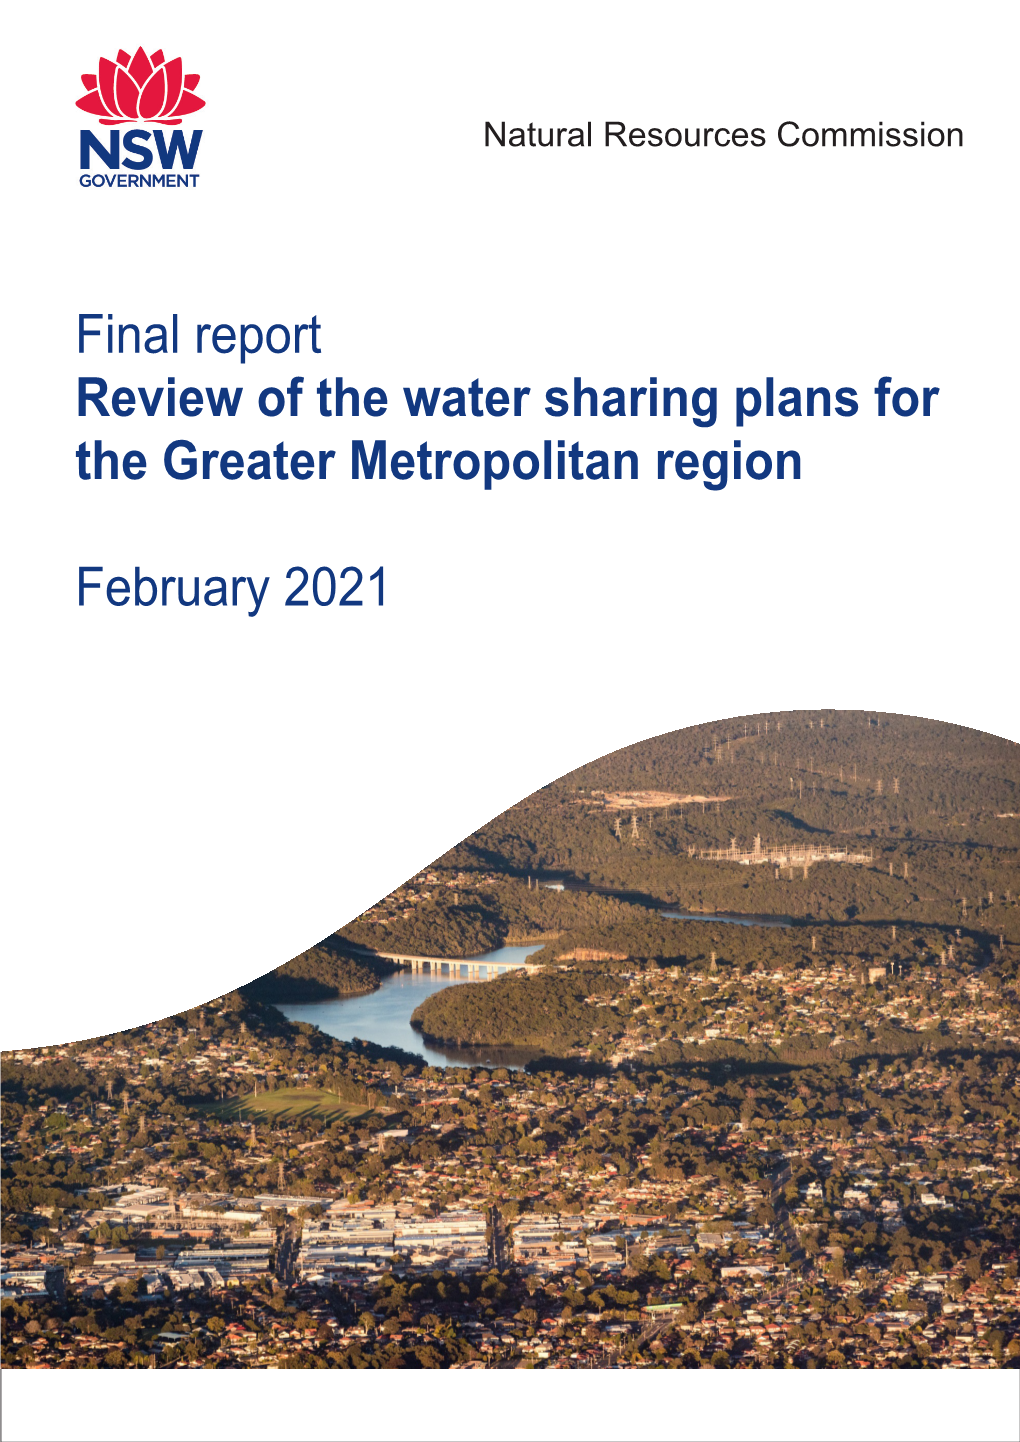 Final Report Review of the Water Sharing Plans for the Greater Metropolitan Region February 2021